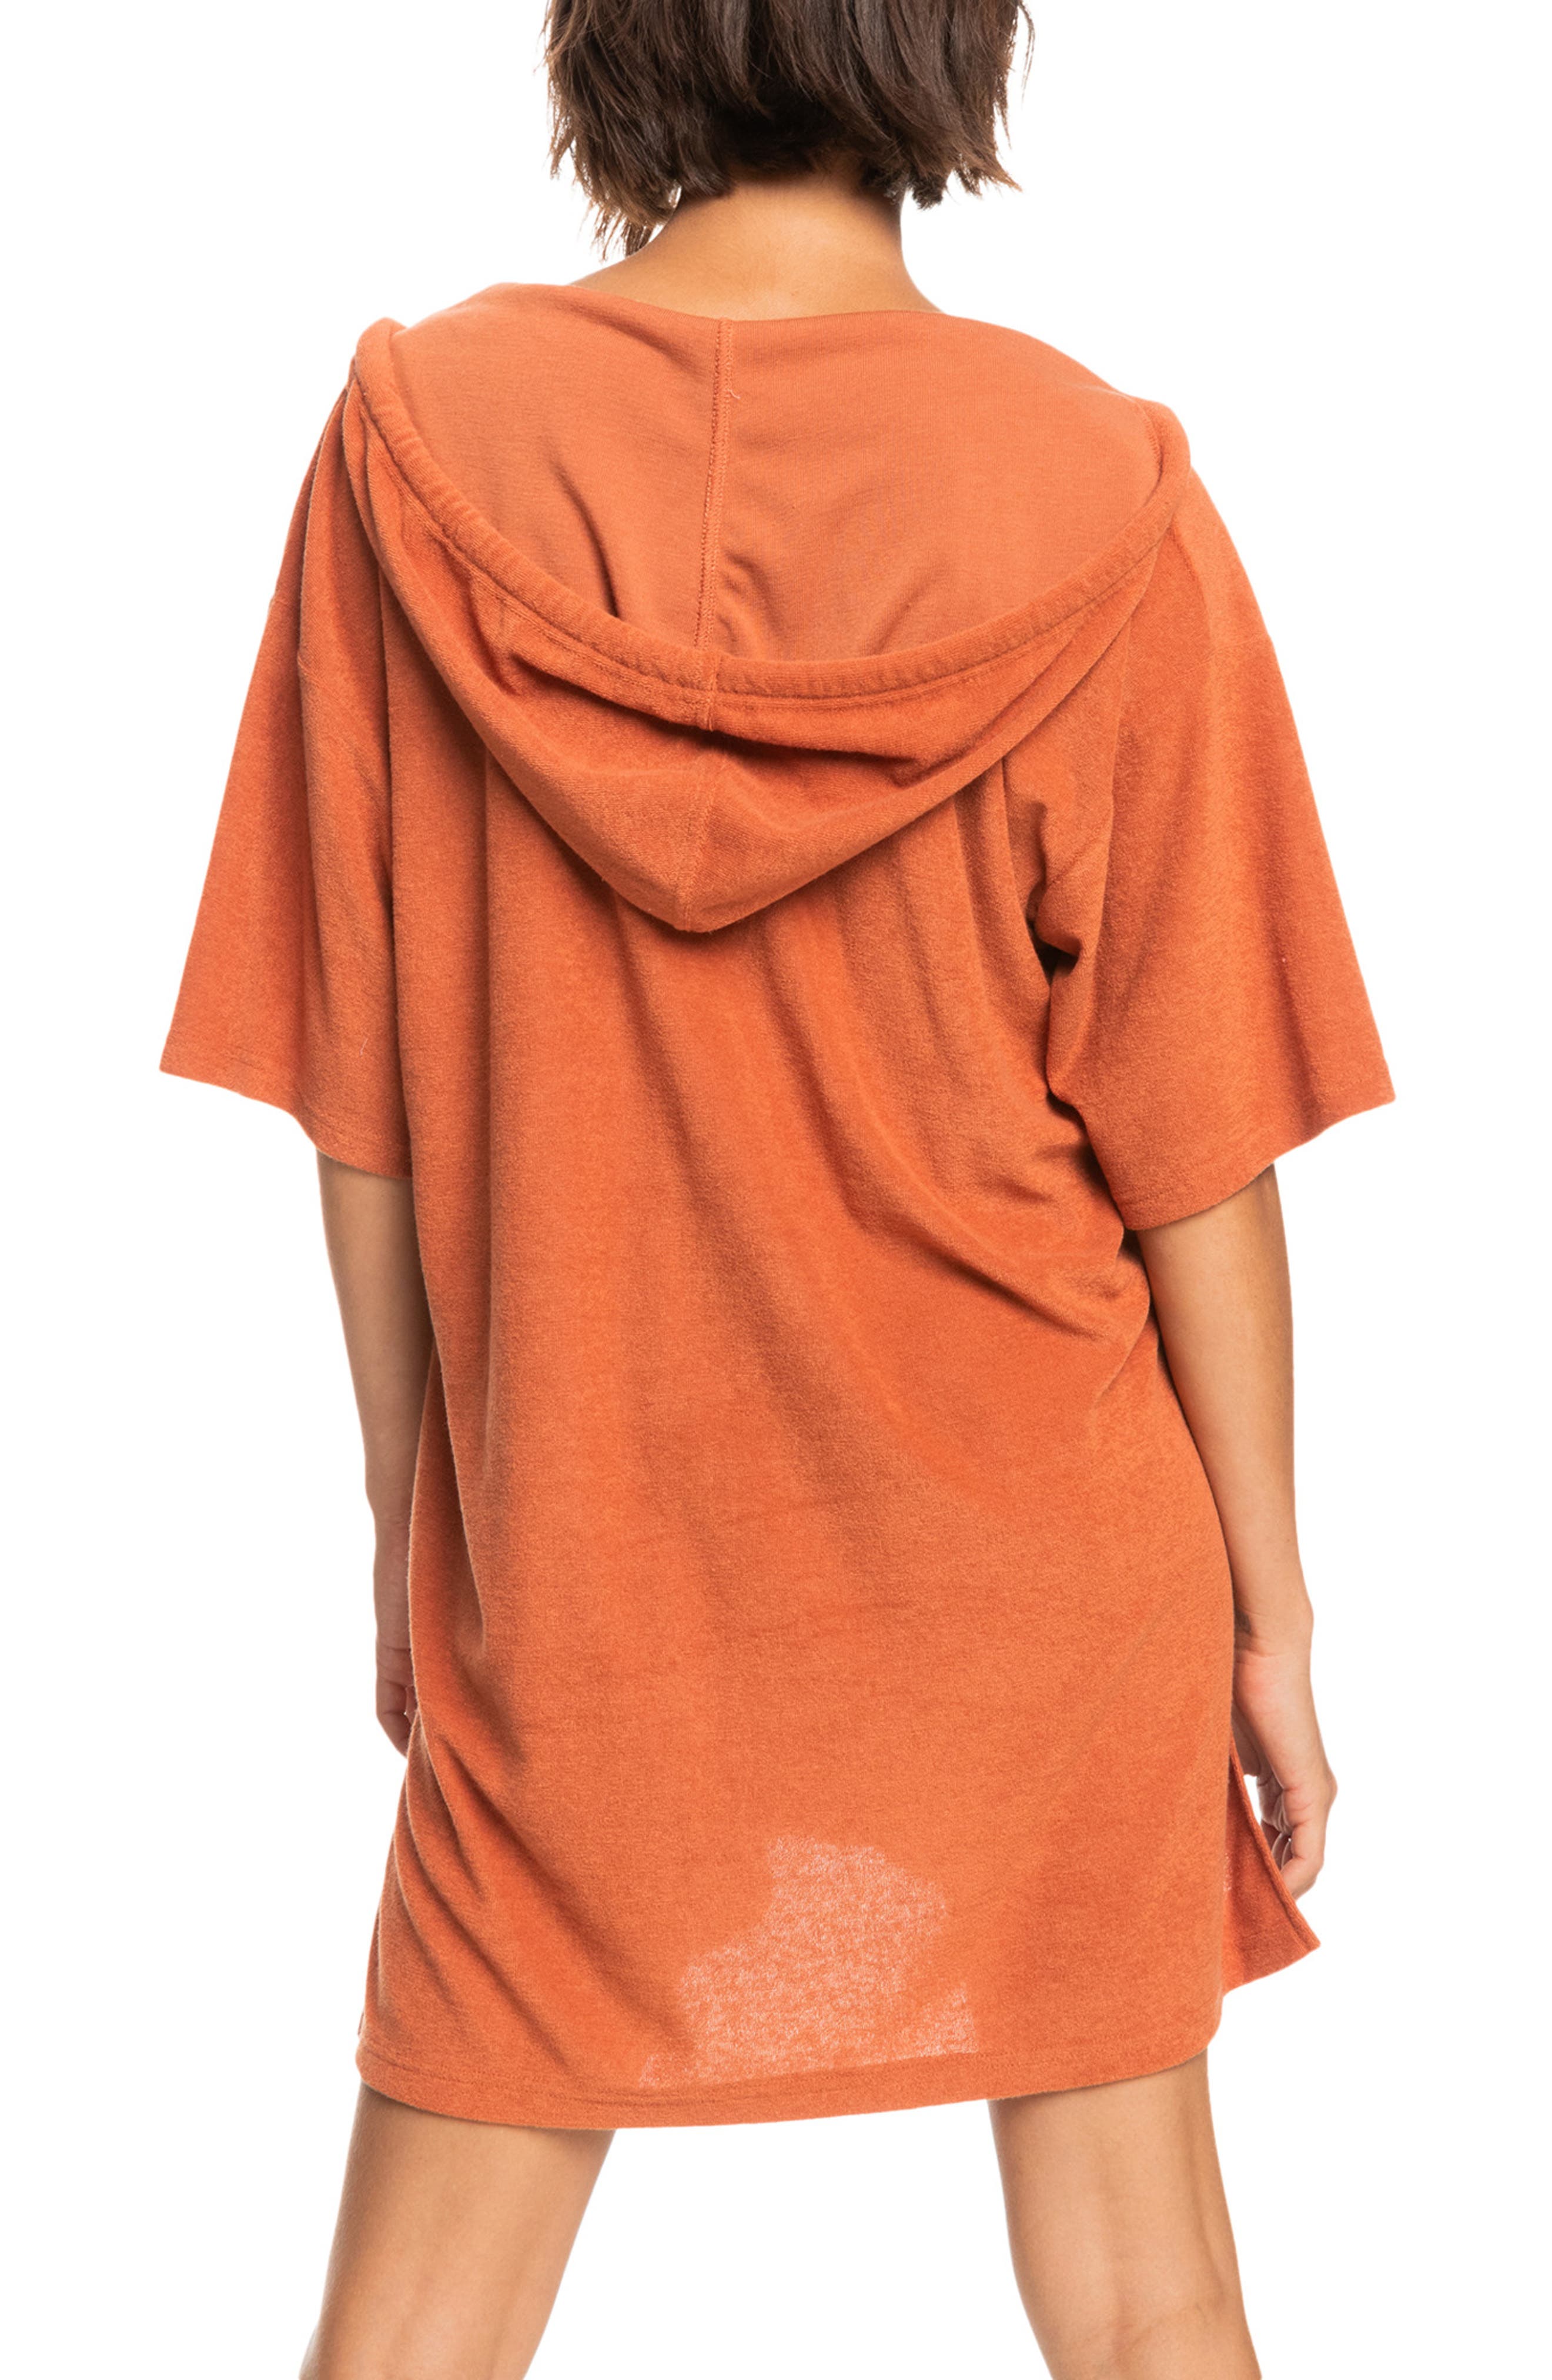 Easy Love Hooded Terry Cloth Cover-Up Tunic in Bright White at Nordstrom Nordstrom Women Sport & Swimwear Beachwear 